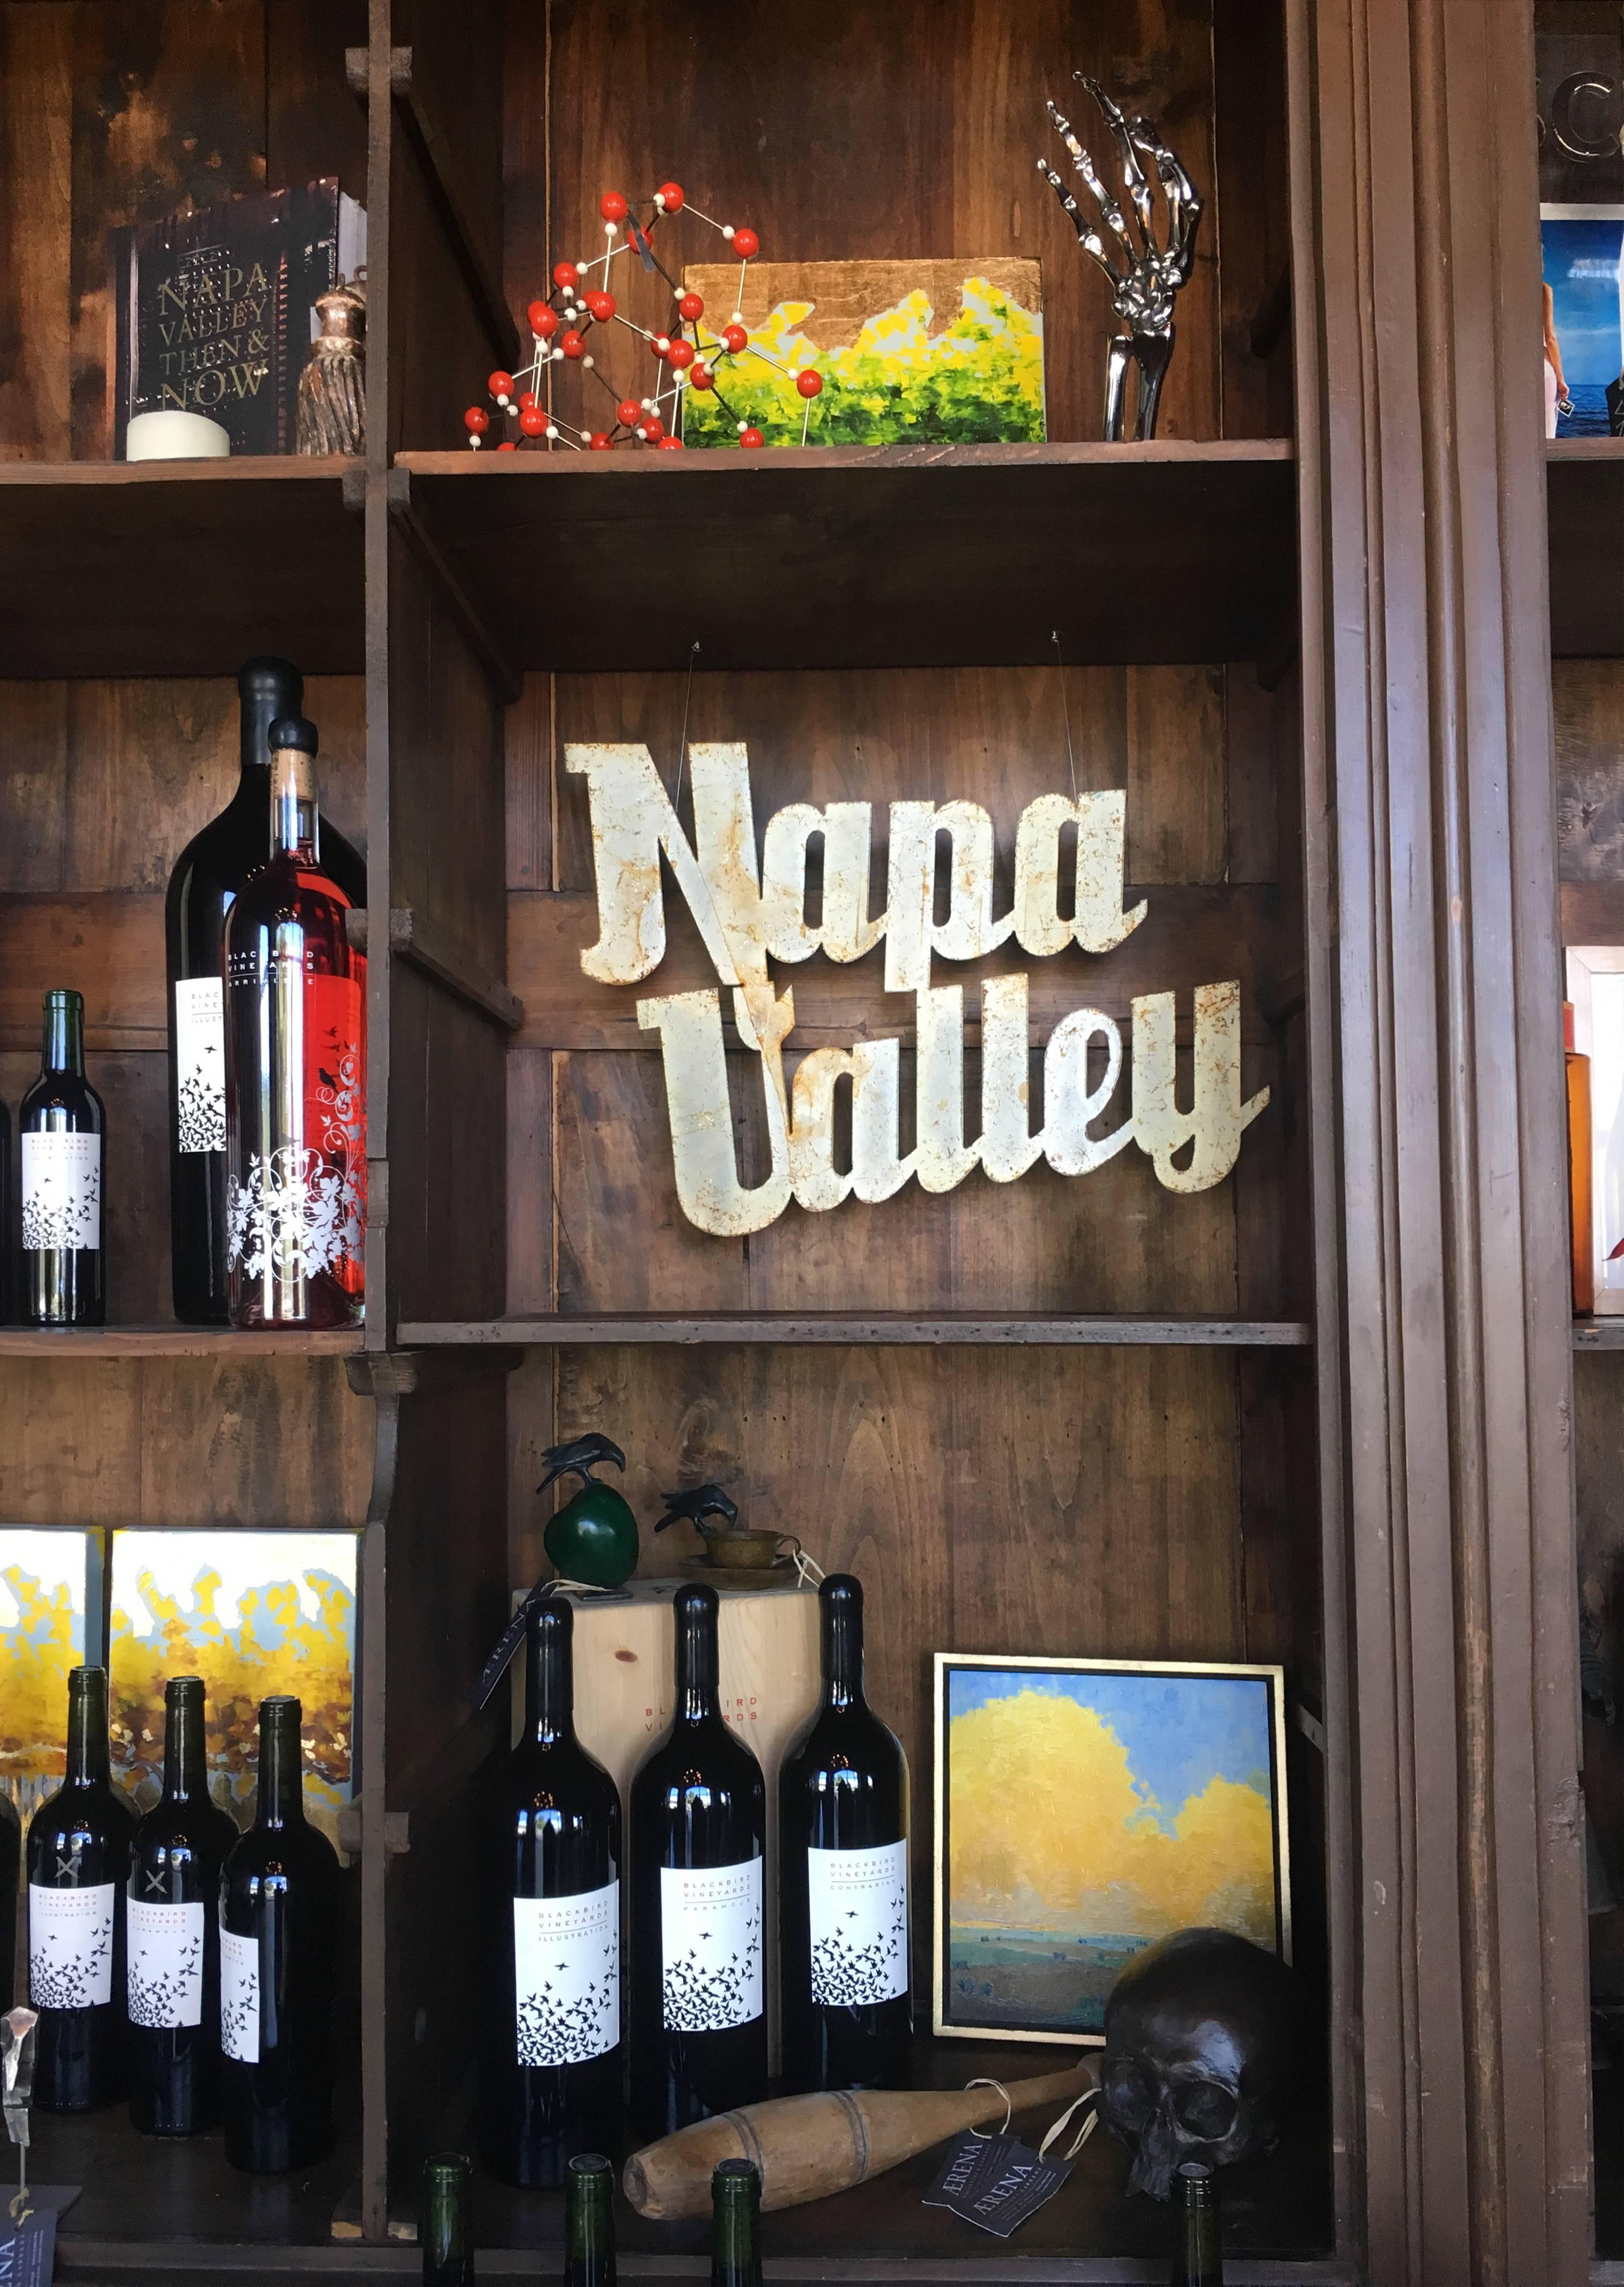 Vintage painted Napa Valley sign perfect for wine cellar or wine country decor. 

Sign is sheet metal painted a cream color with patina and abrasions; please see images for a closer look at surface texture.